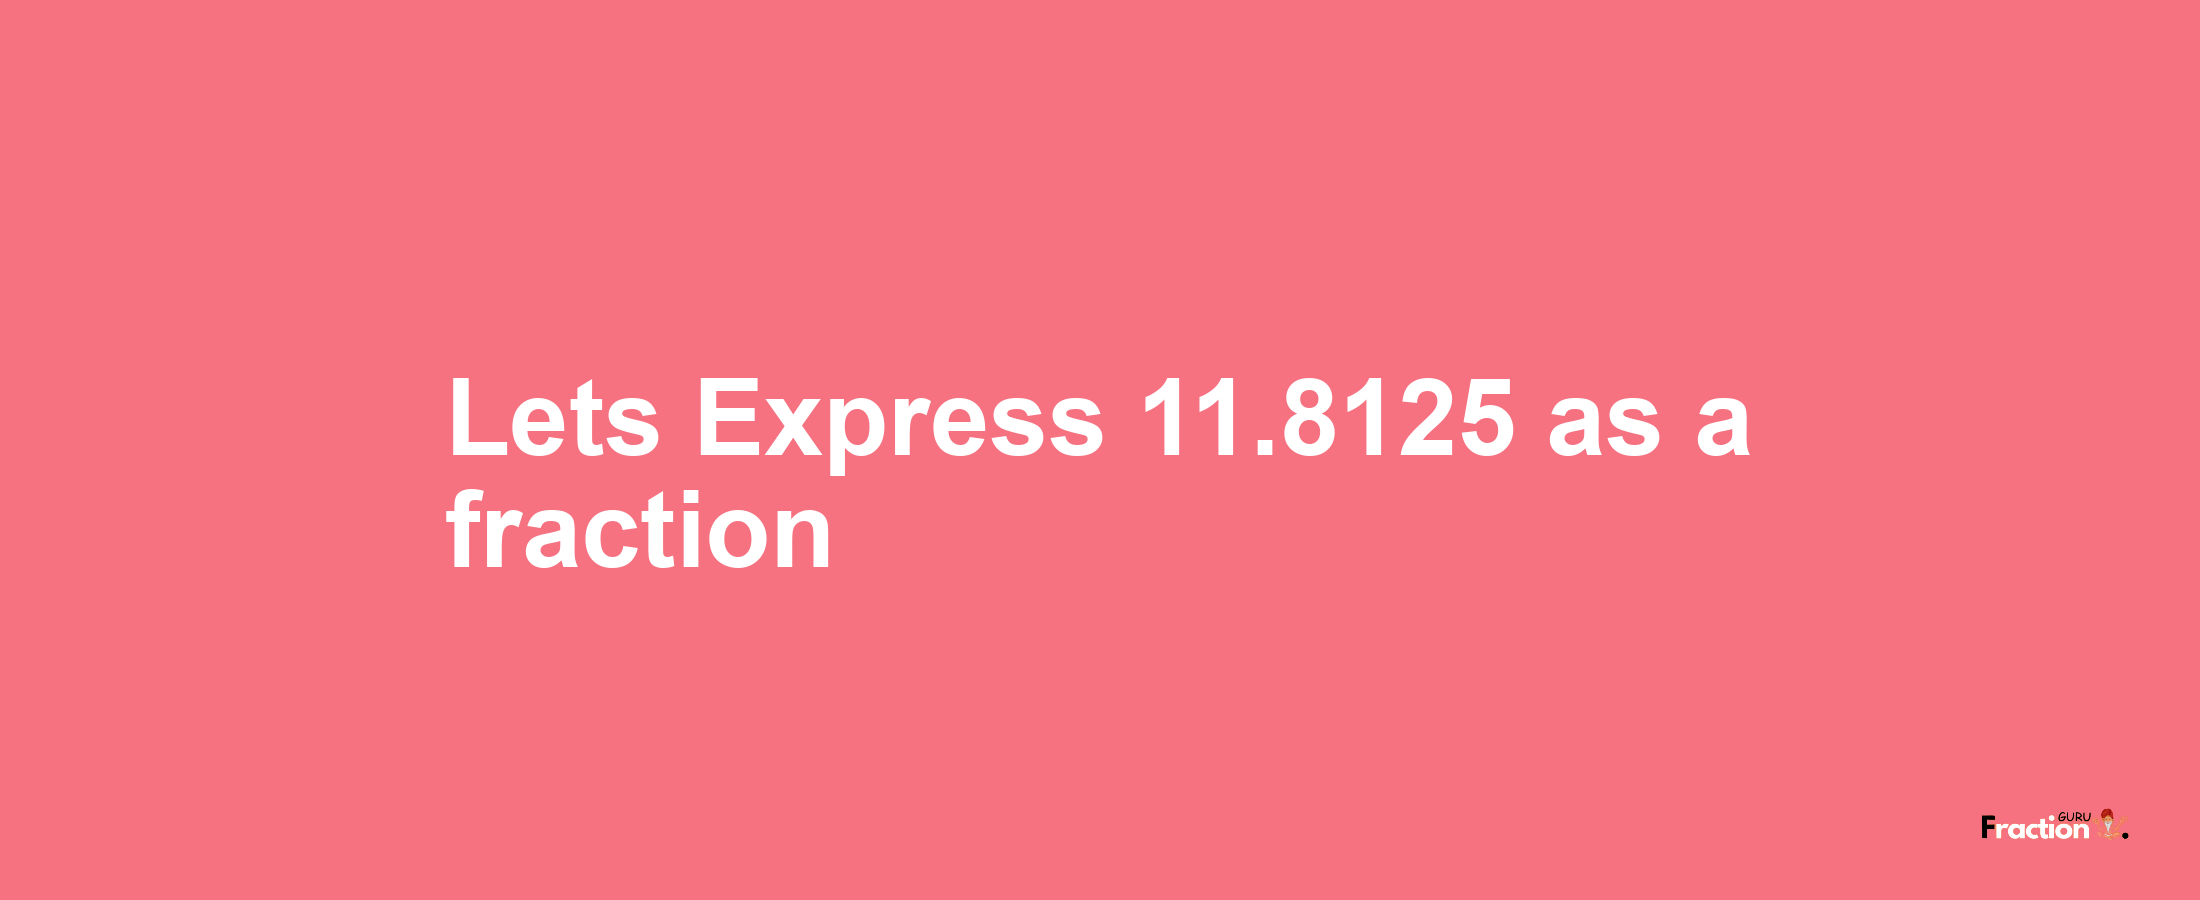 Lets Express 11.8125 as afraction